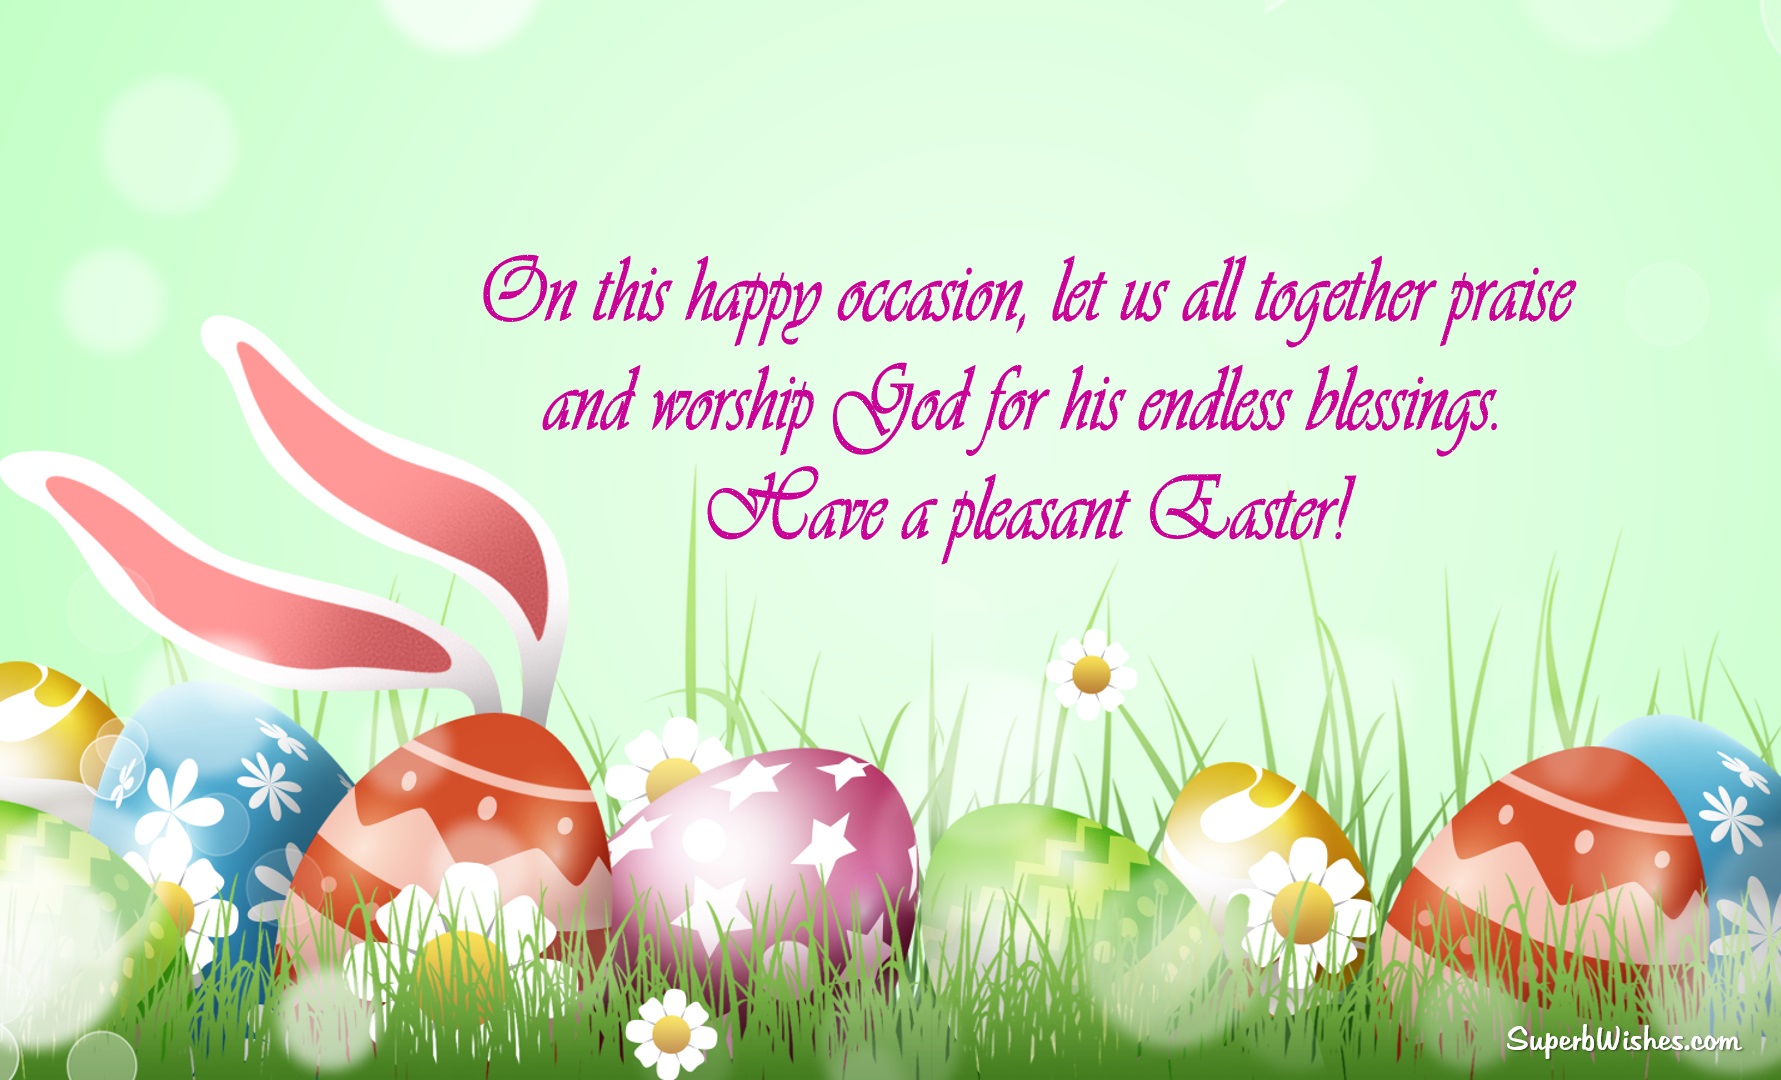 Beautiful Happy Easter Images by SuperbWishes